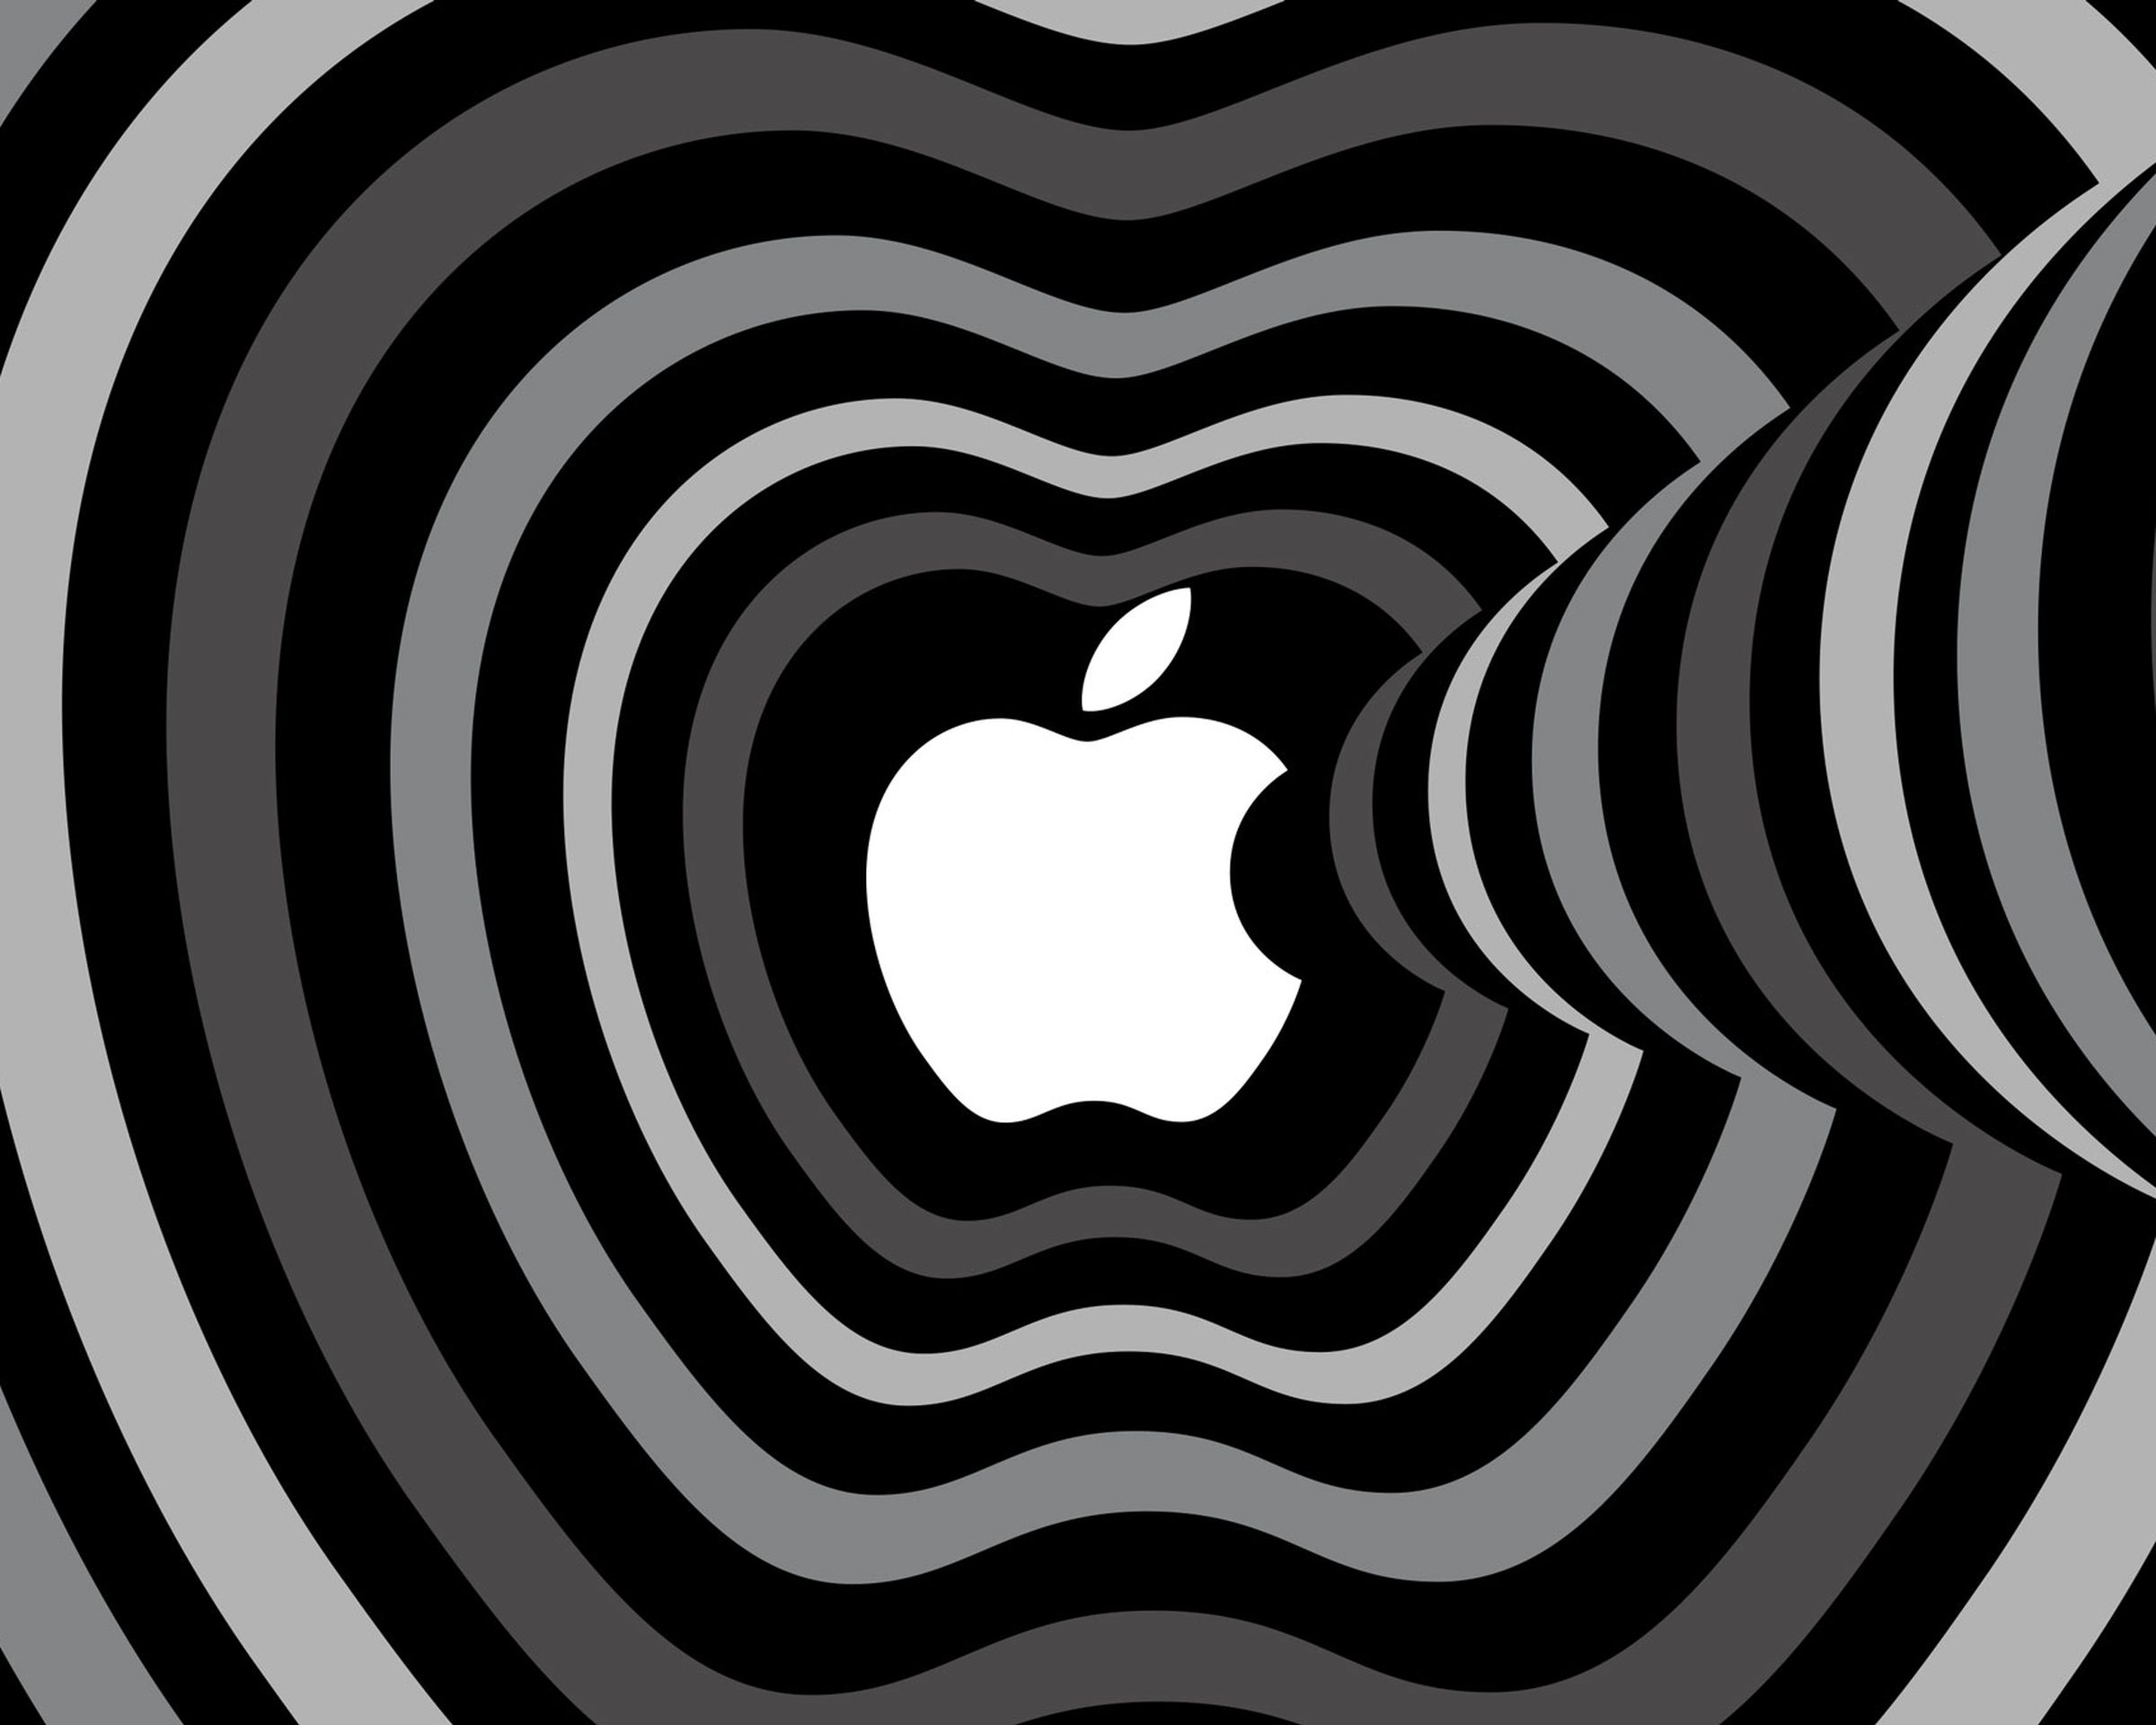 A black-and-white graphic showing the Apple logo